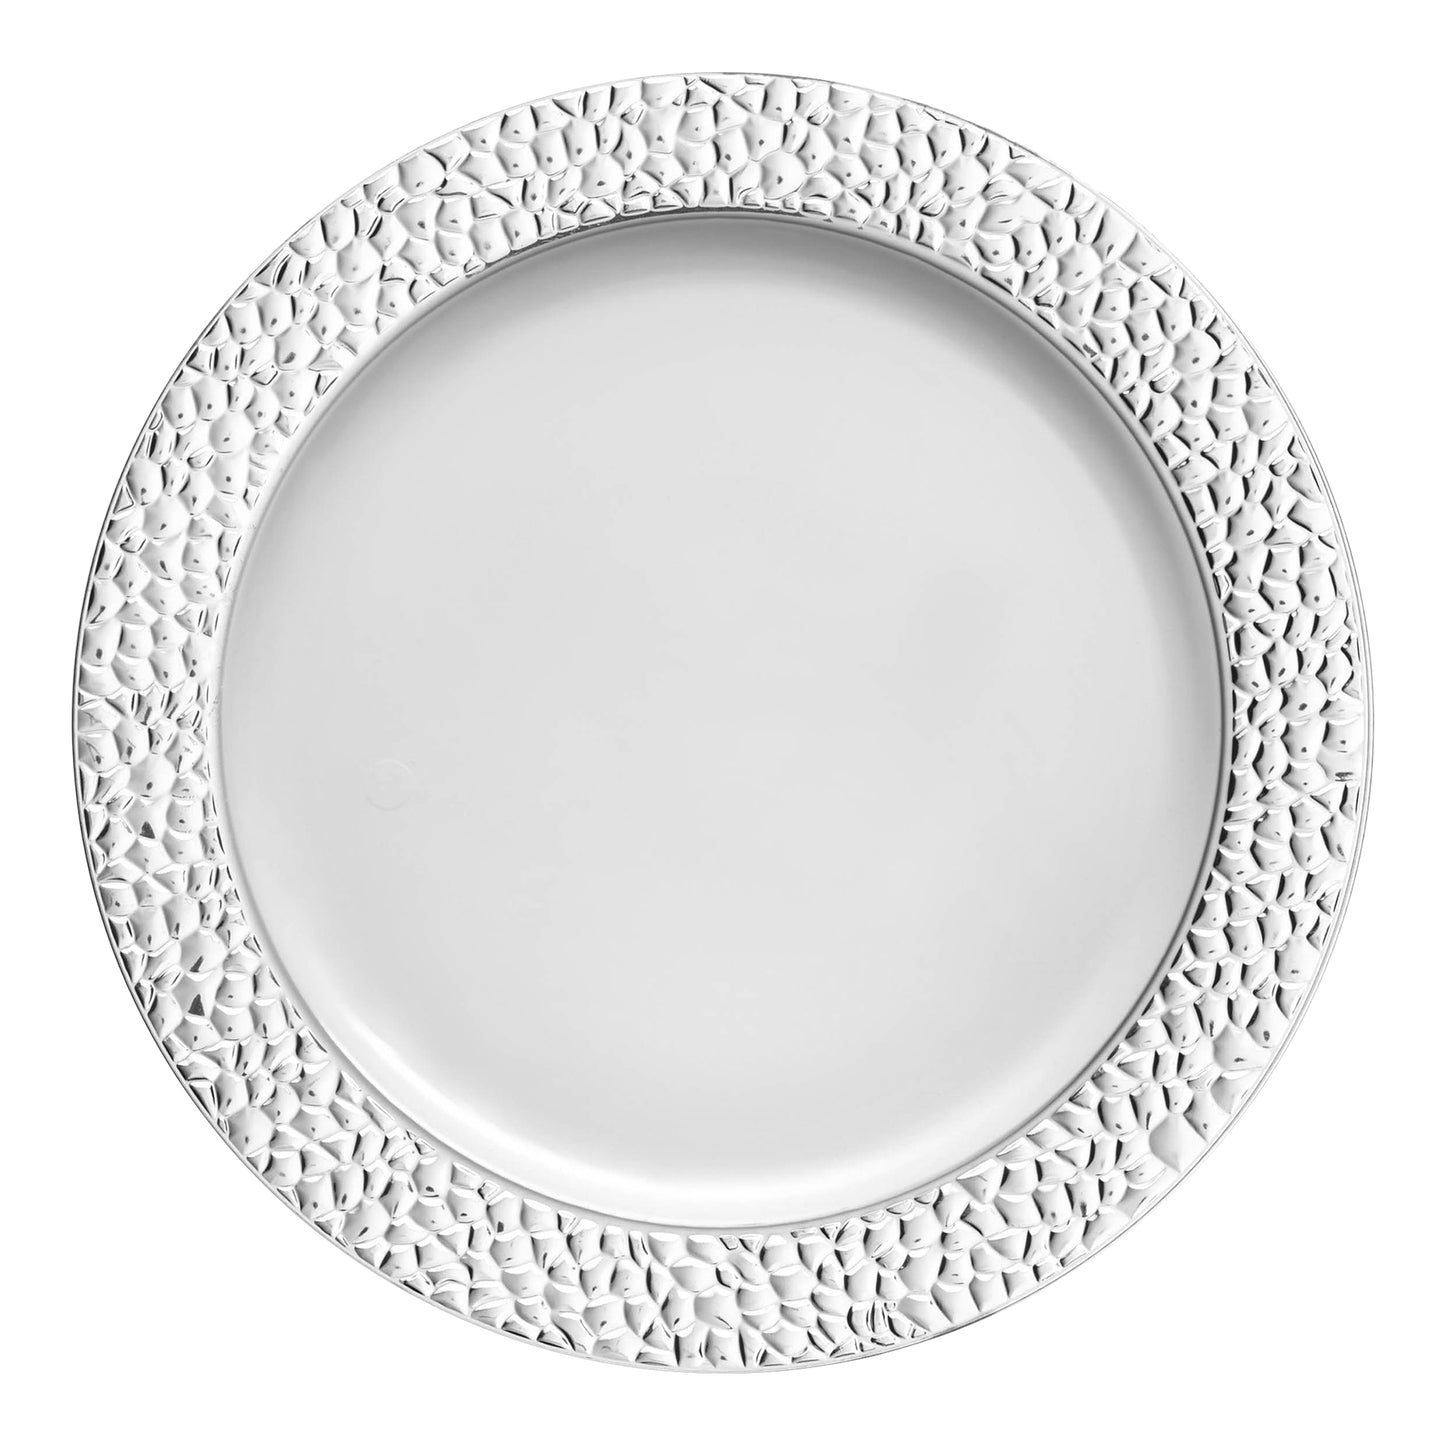 White with Silver Hammered Rim Round Plastic Appetizer/Salad Plates (7.5") | The Kaya Collection